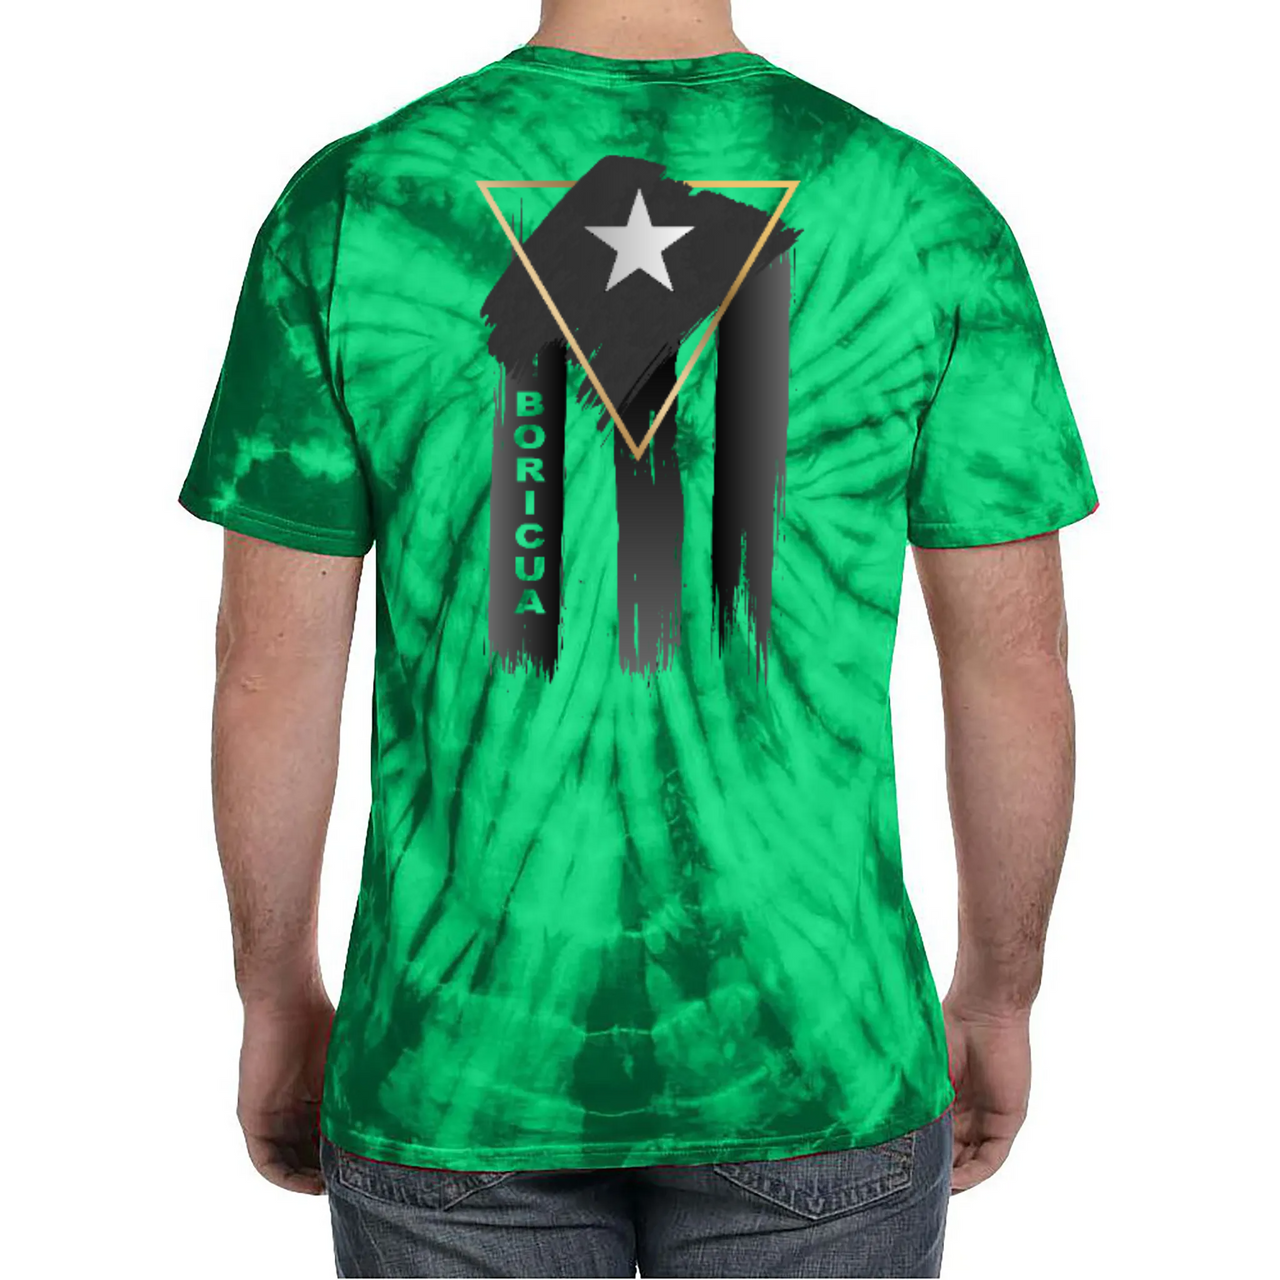 Badass Boricua Front and Back Image Tie-Dye T-Shirt